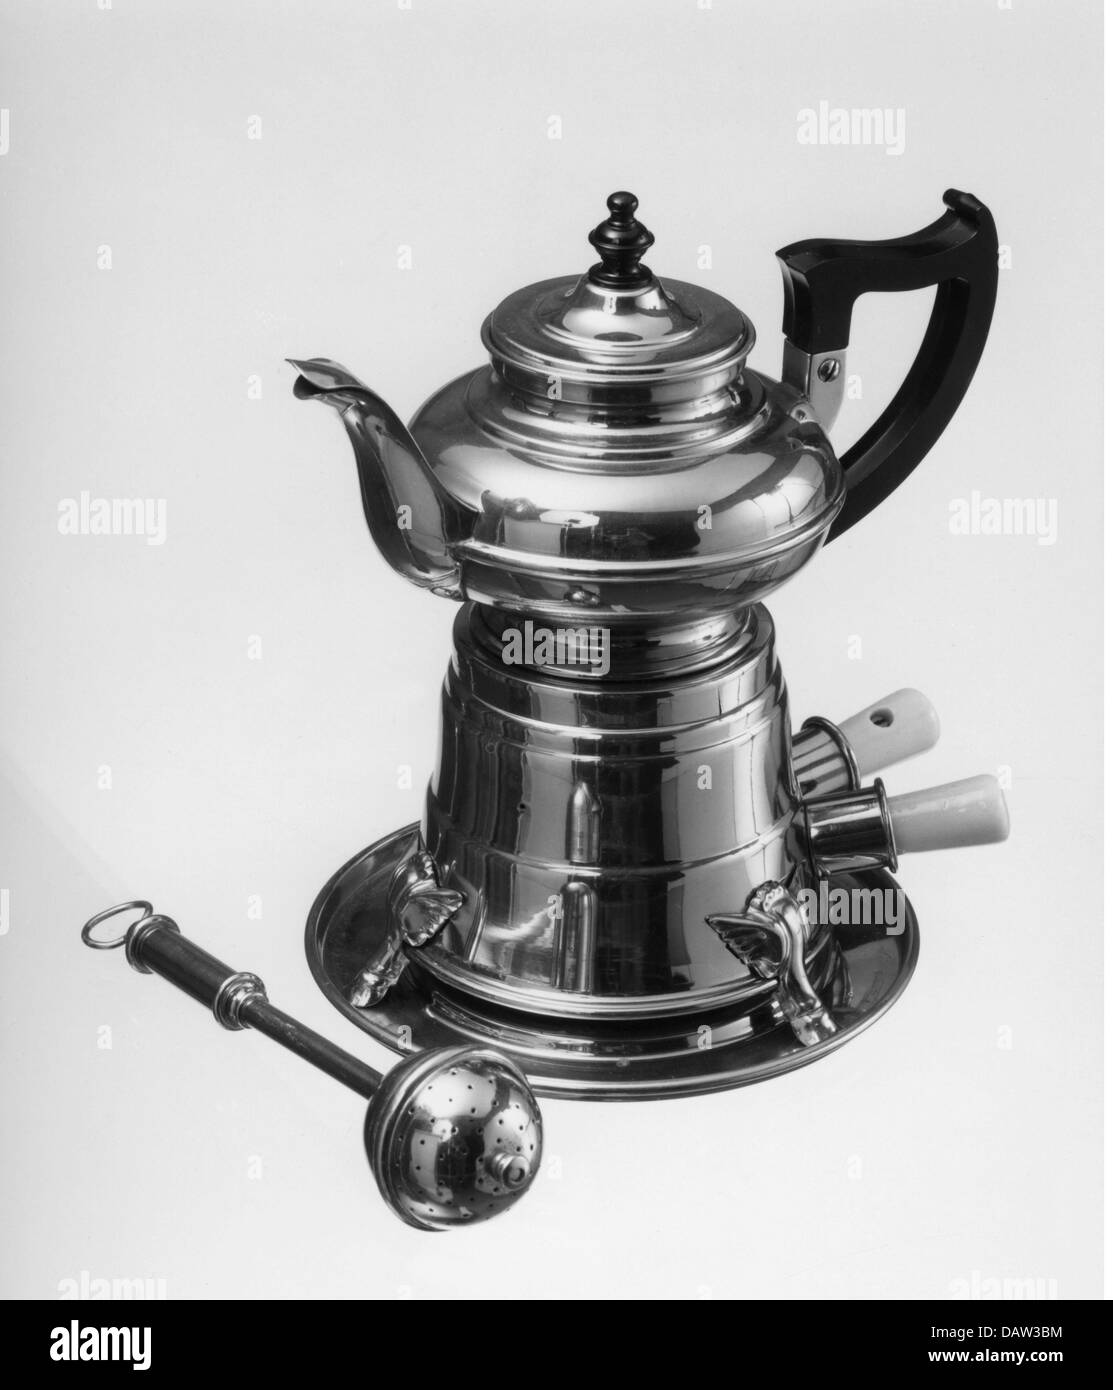 household, kitchen and kitchenware, tea urn, circa 1922, Additional-Rights-Clearences-Not Available Stock Photo